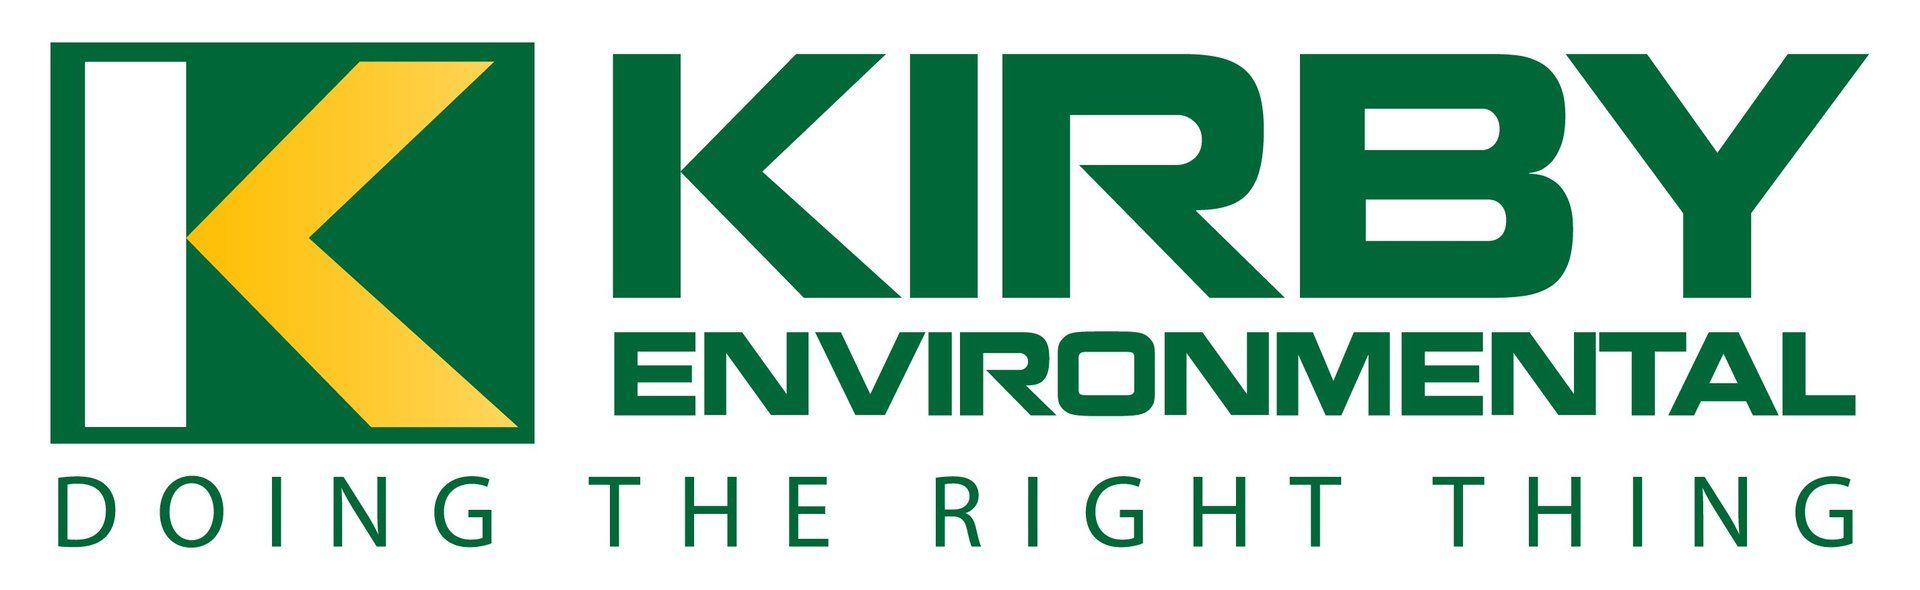 Kirby Environmental, Doing the Right Thing Logo